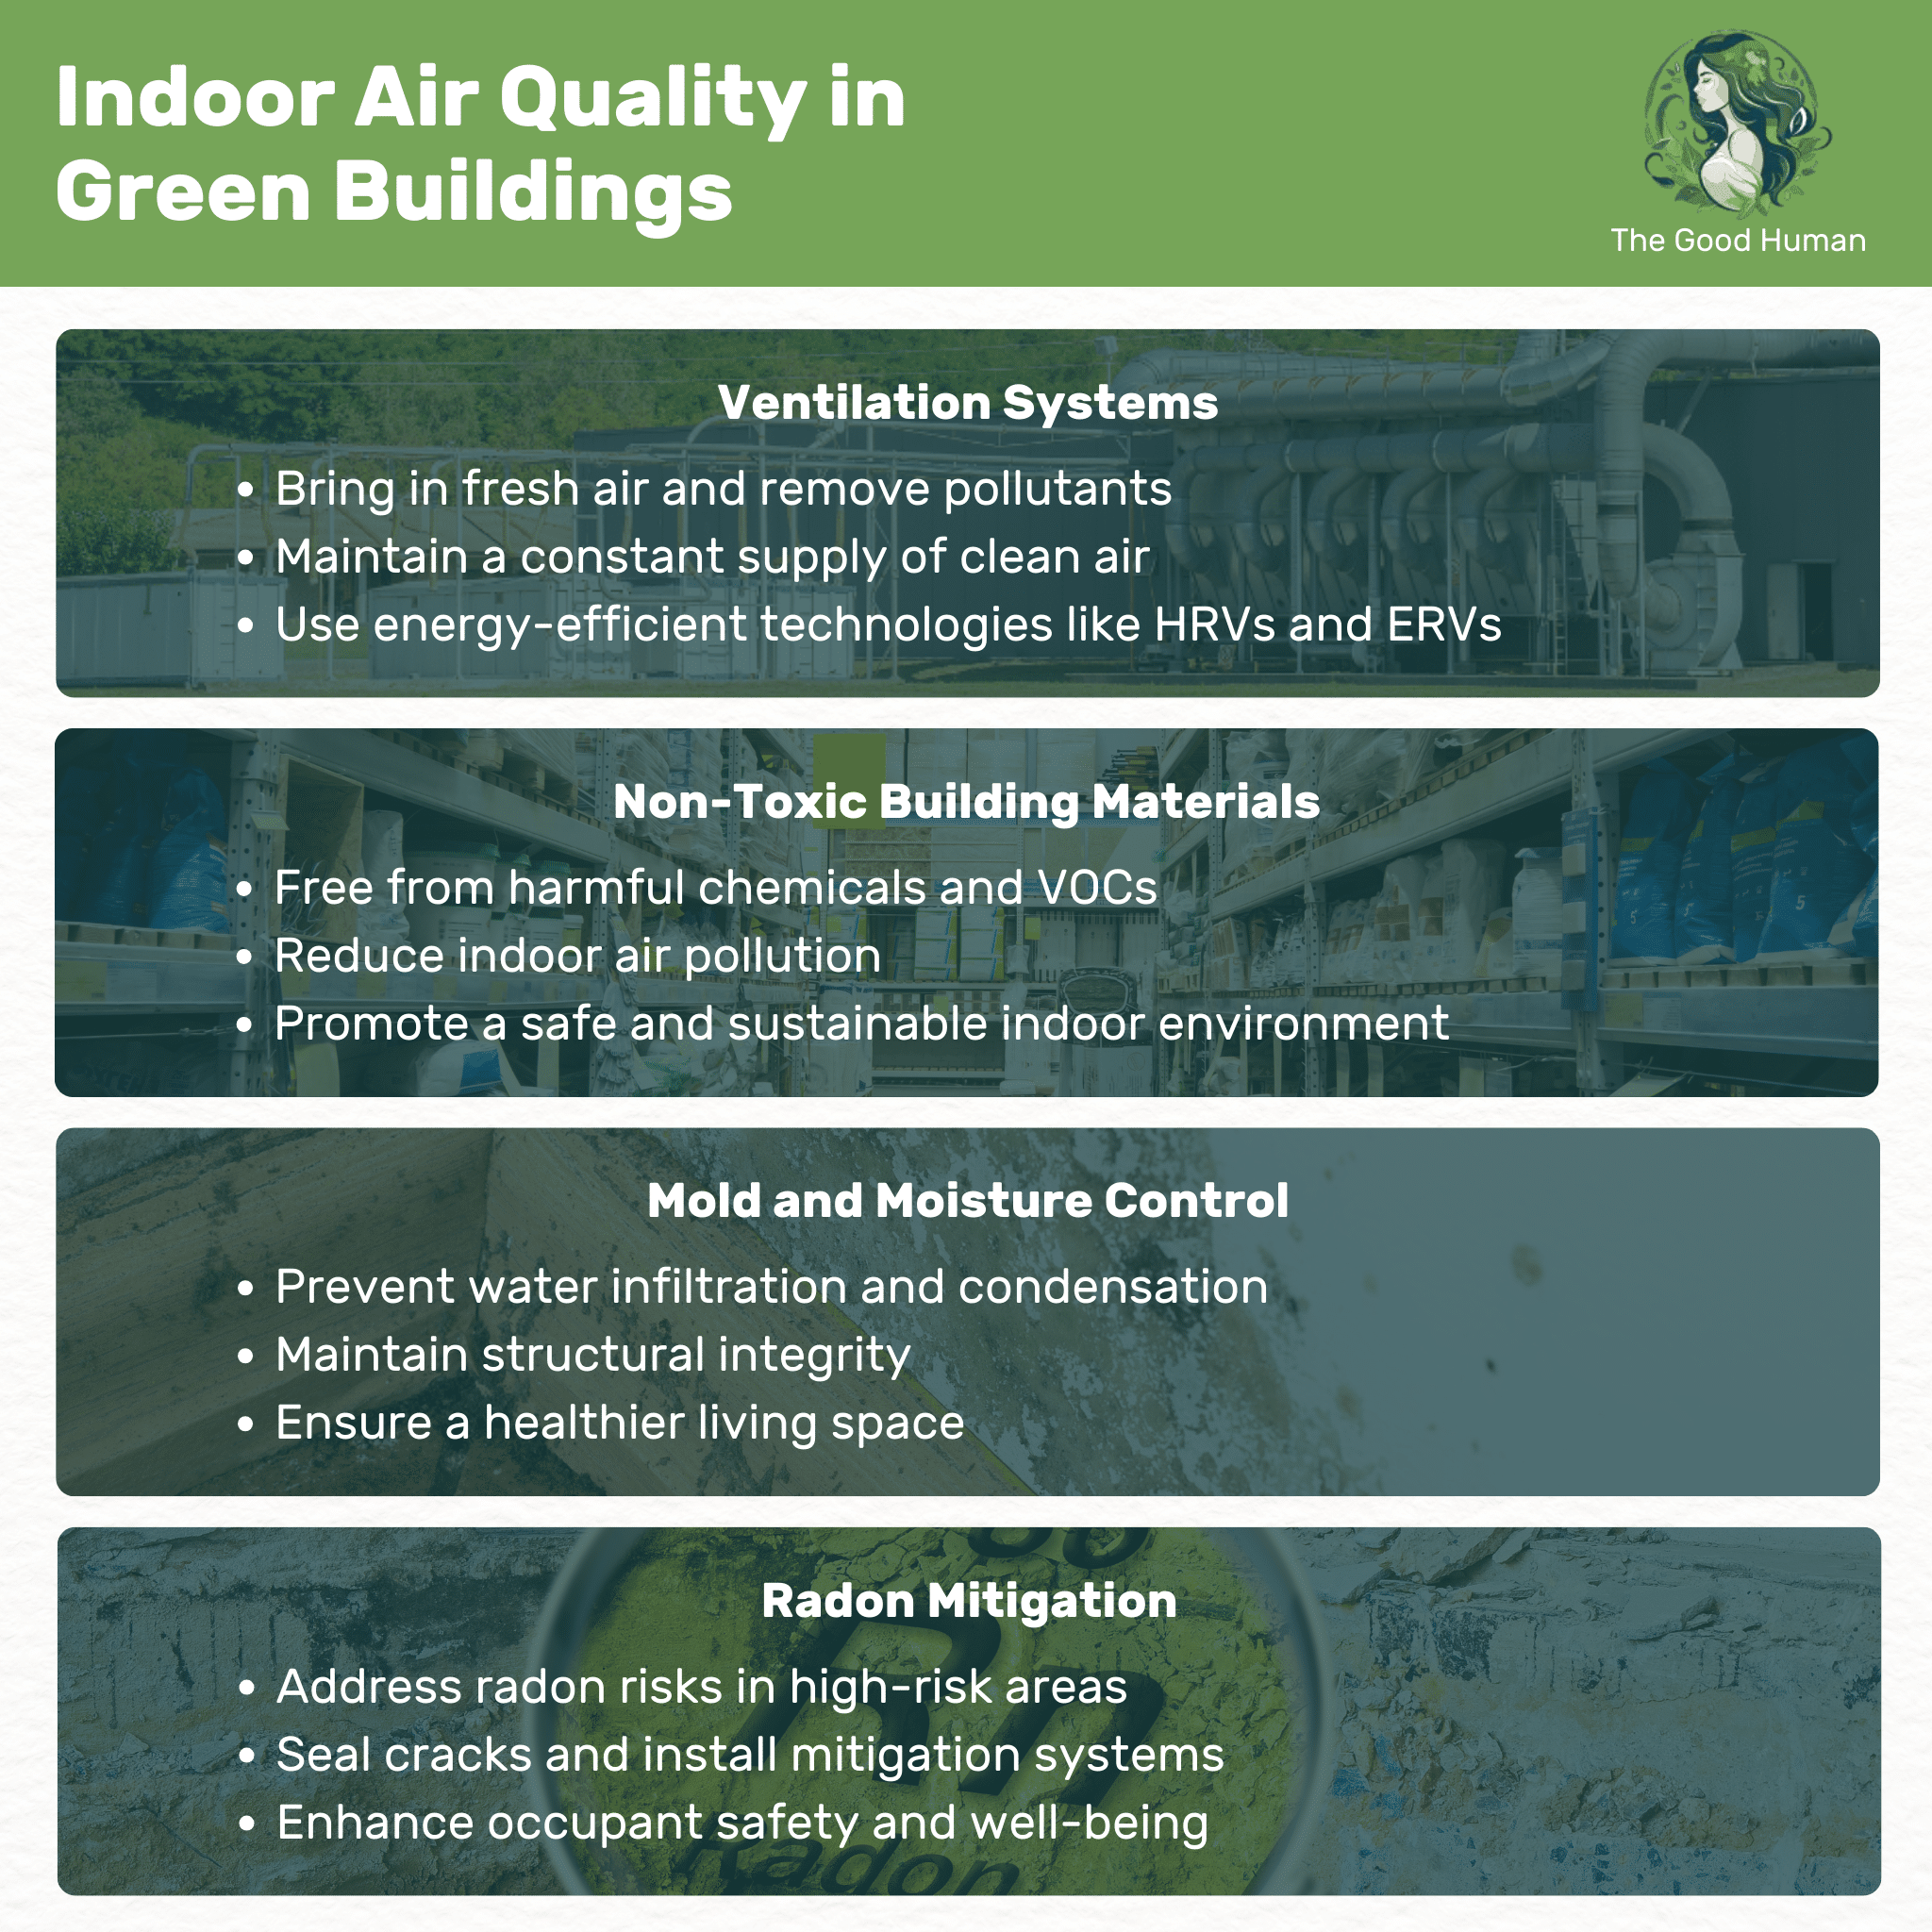 Benefits of indoor air quality in green buildings